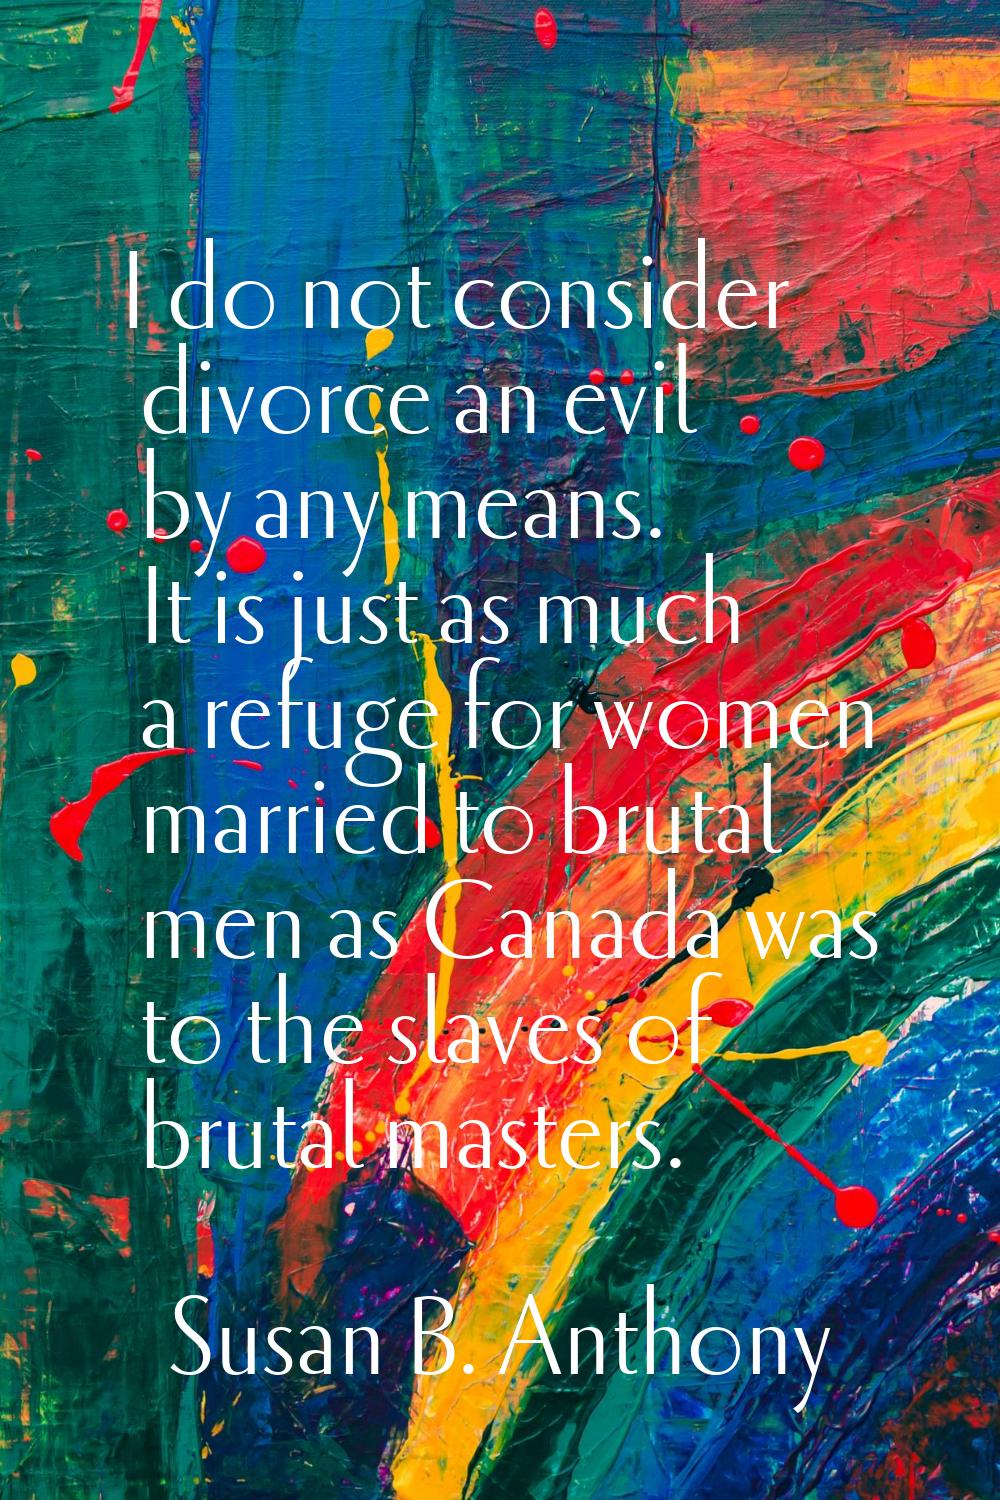 I do not consider divorce an evil by any means. It is just as much a refuge for women married to br